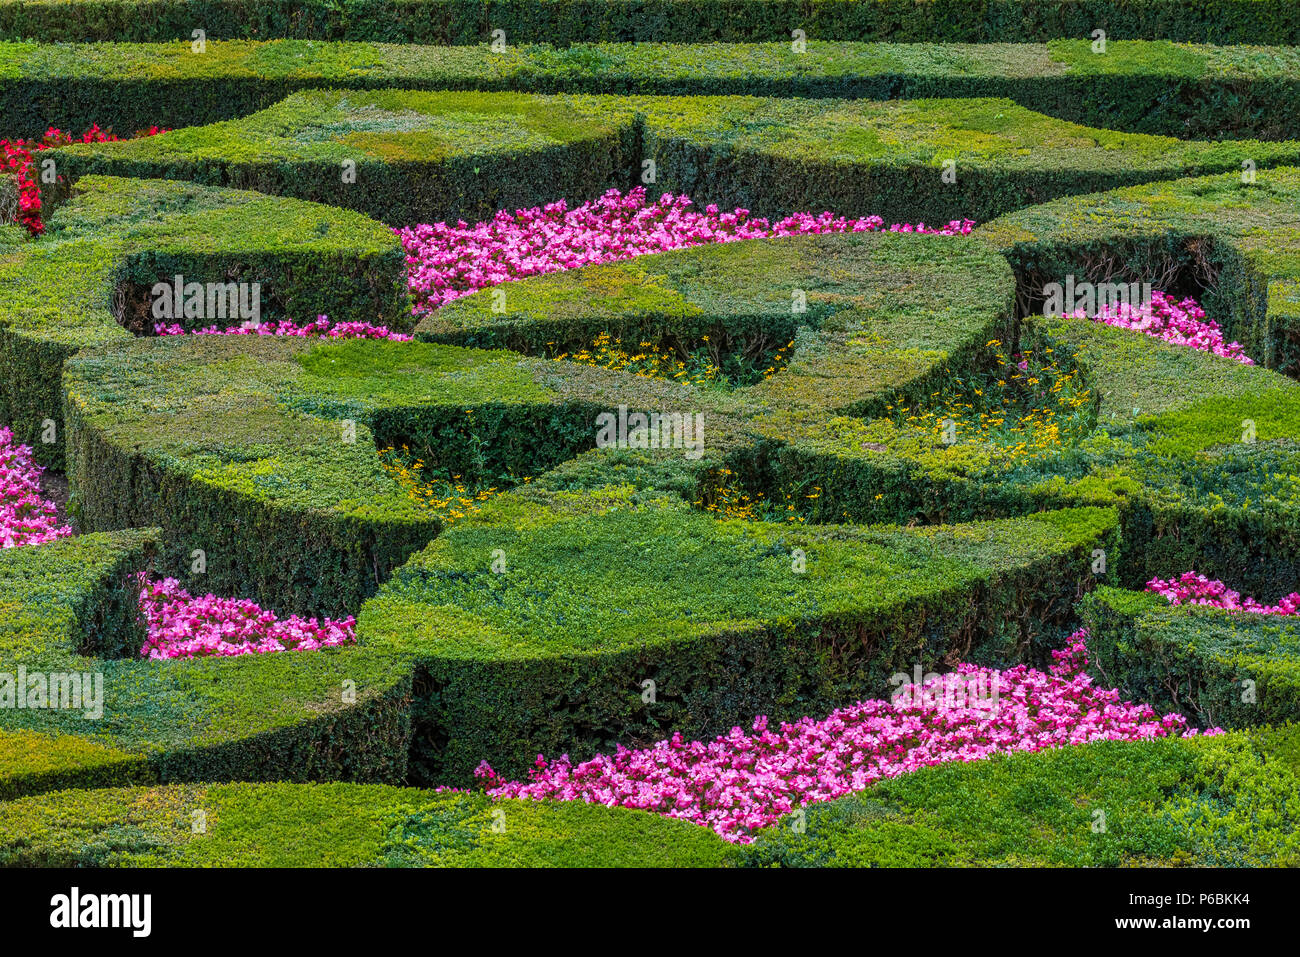 France, Centre-Val de Loire, Indre-et-Loire, view of the Gardens of Villandry, bed of trimmed boxwood and flowers Stock Photo